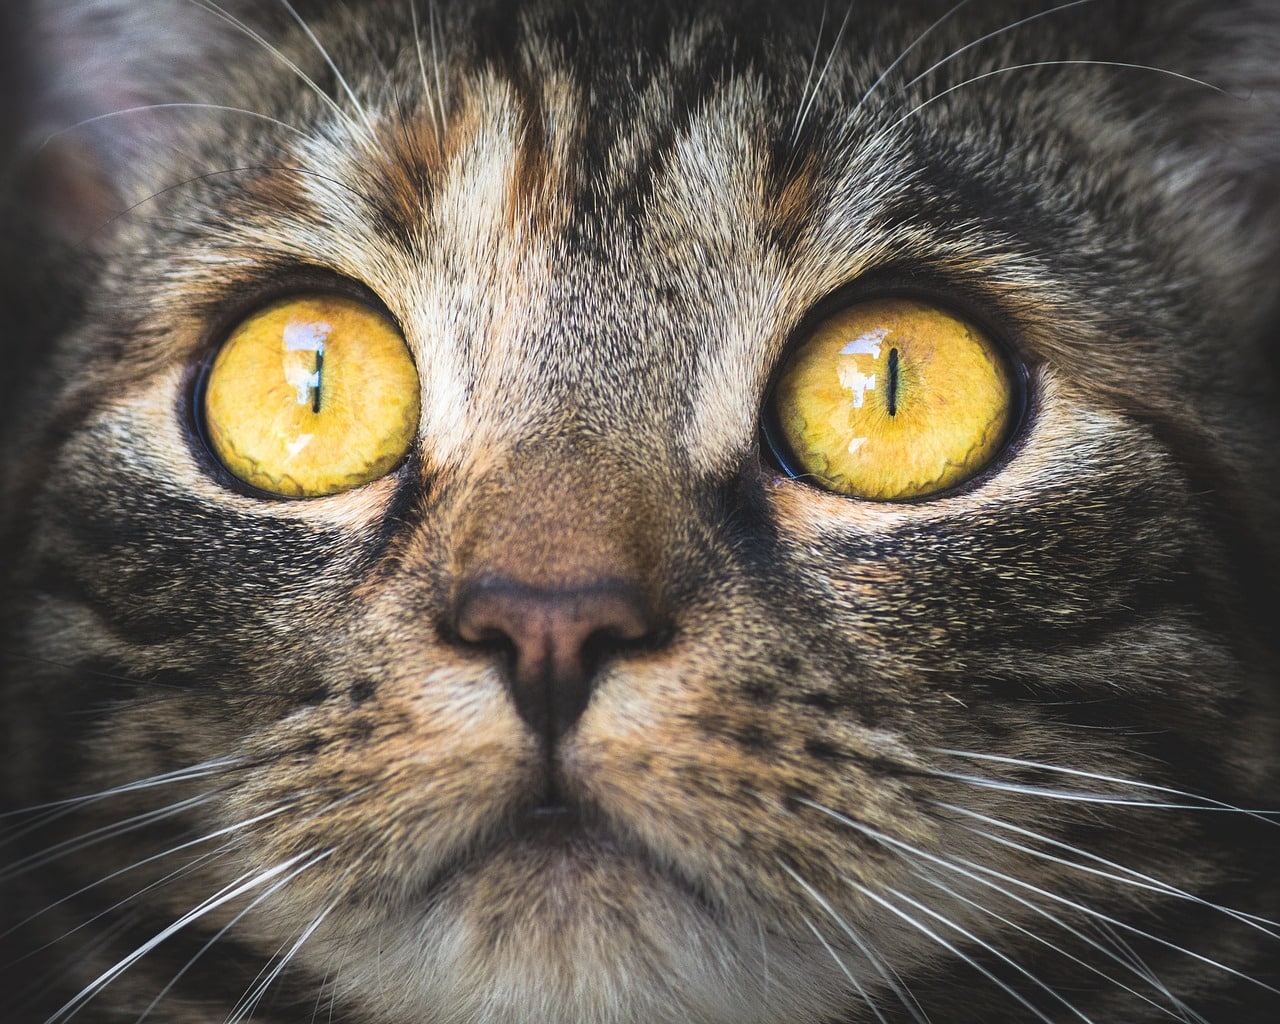 Tabby Cat with Golden Eyes Looking up